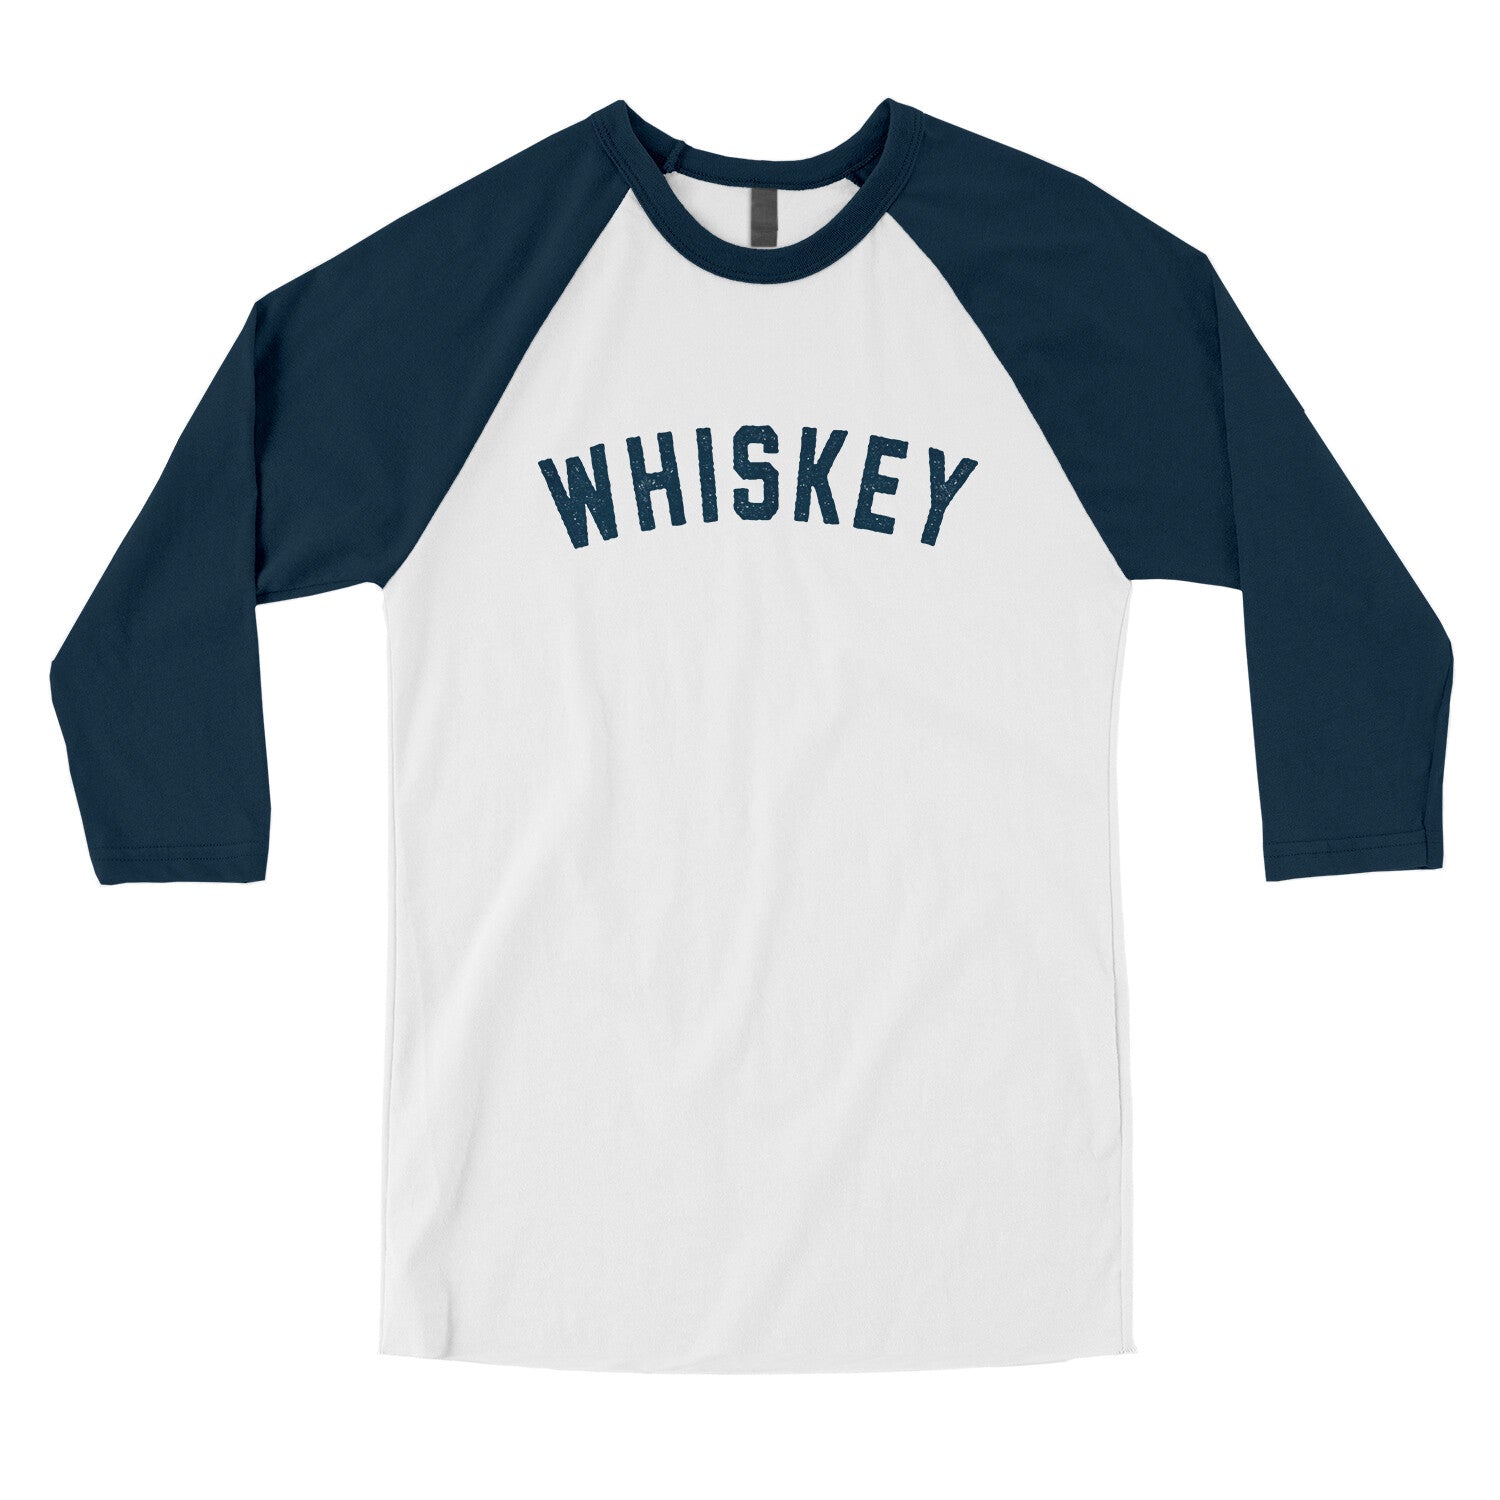 Whiskey in White with Navy Color